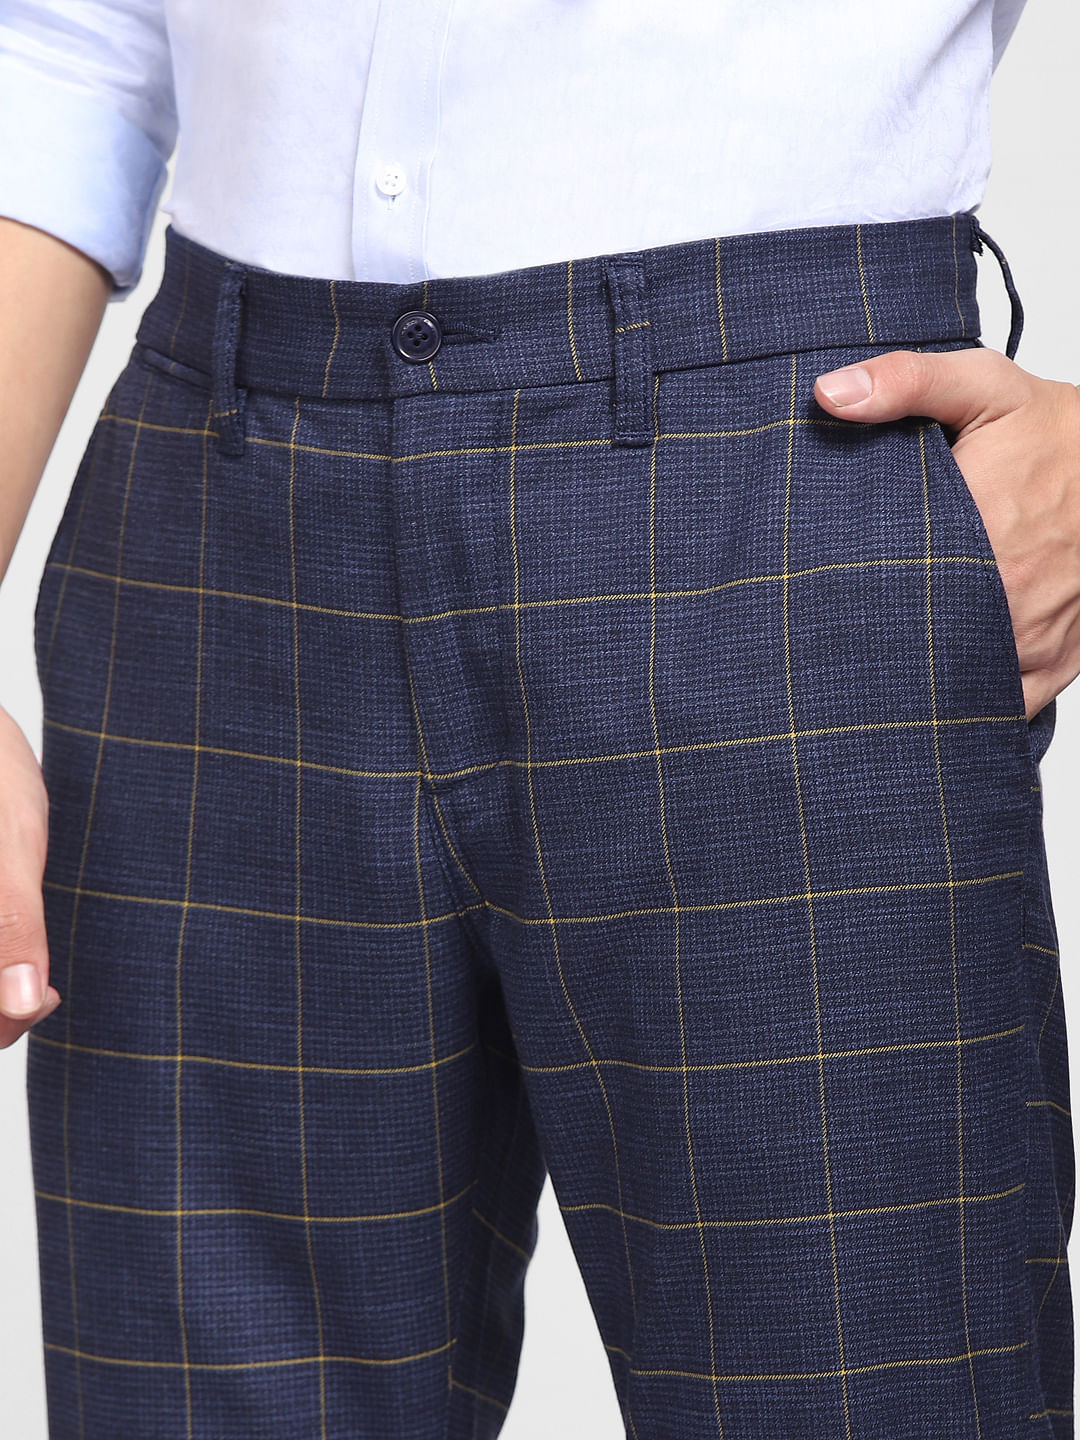 Checked Trousers - Buy Checked Trousers Online Starting at Just ₹152 |  Meesho